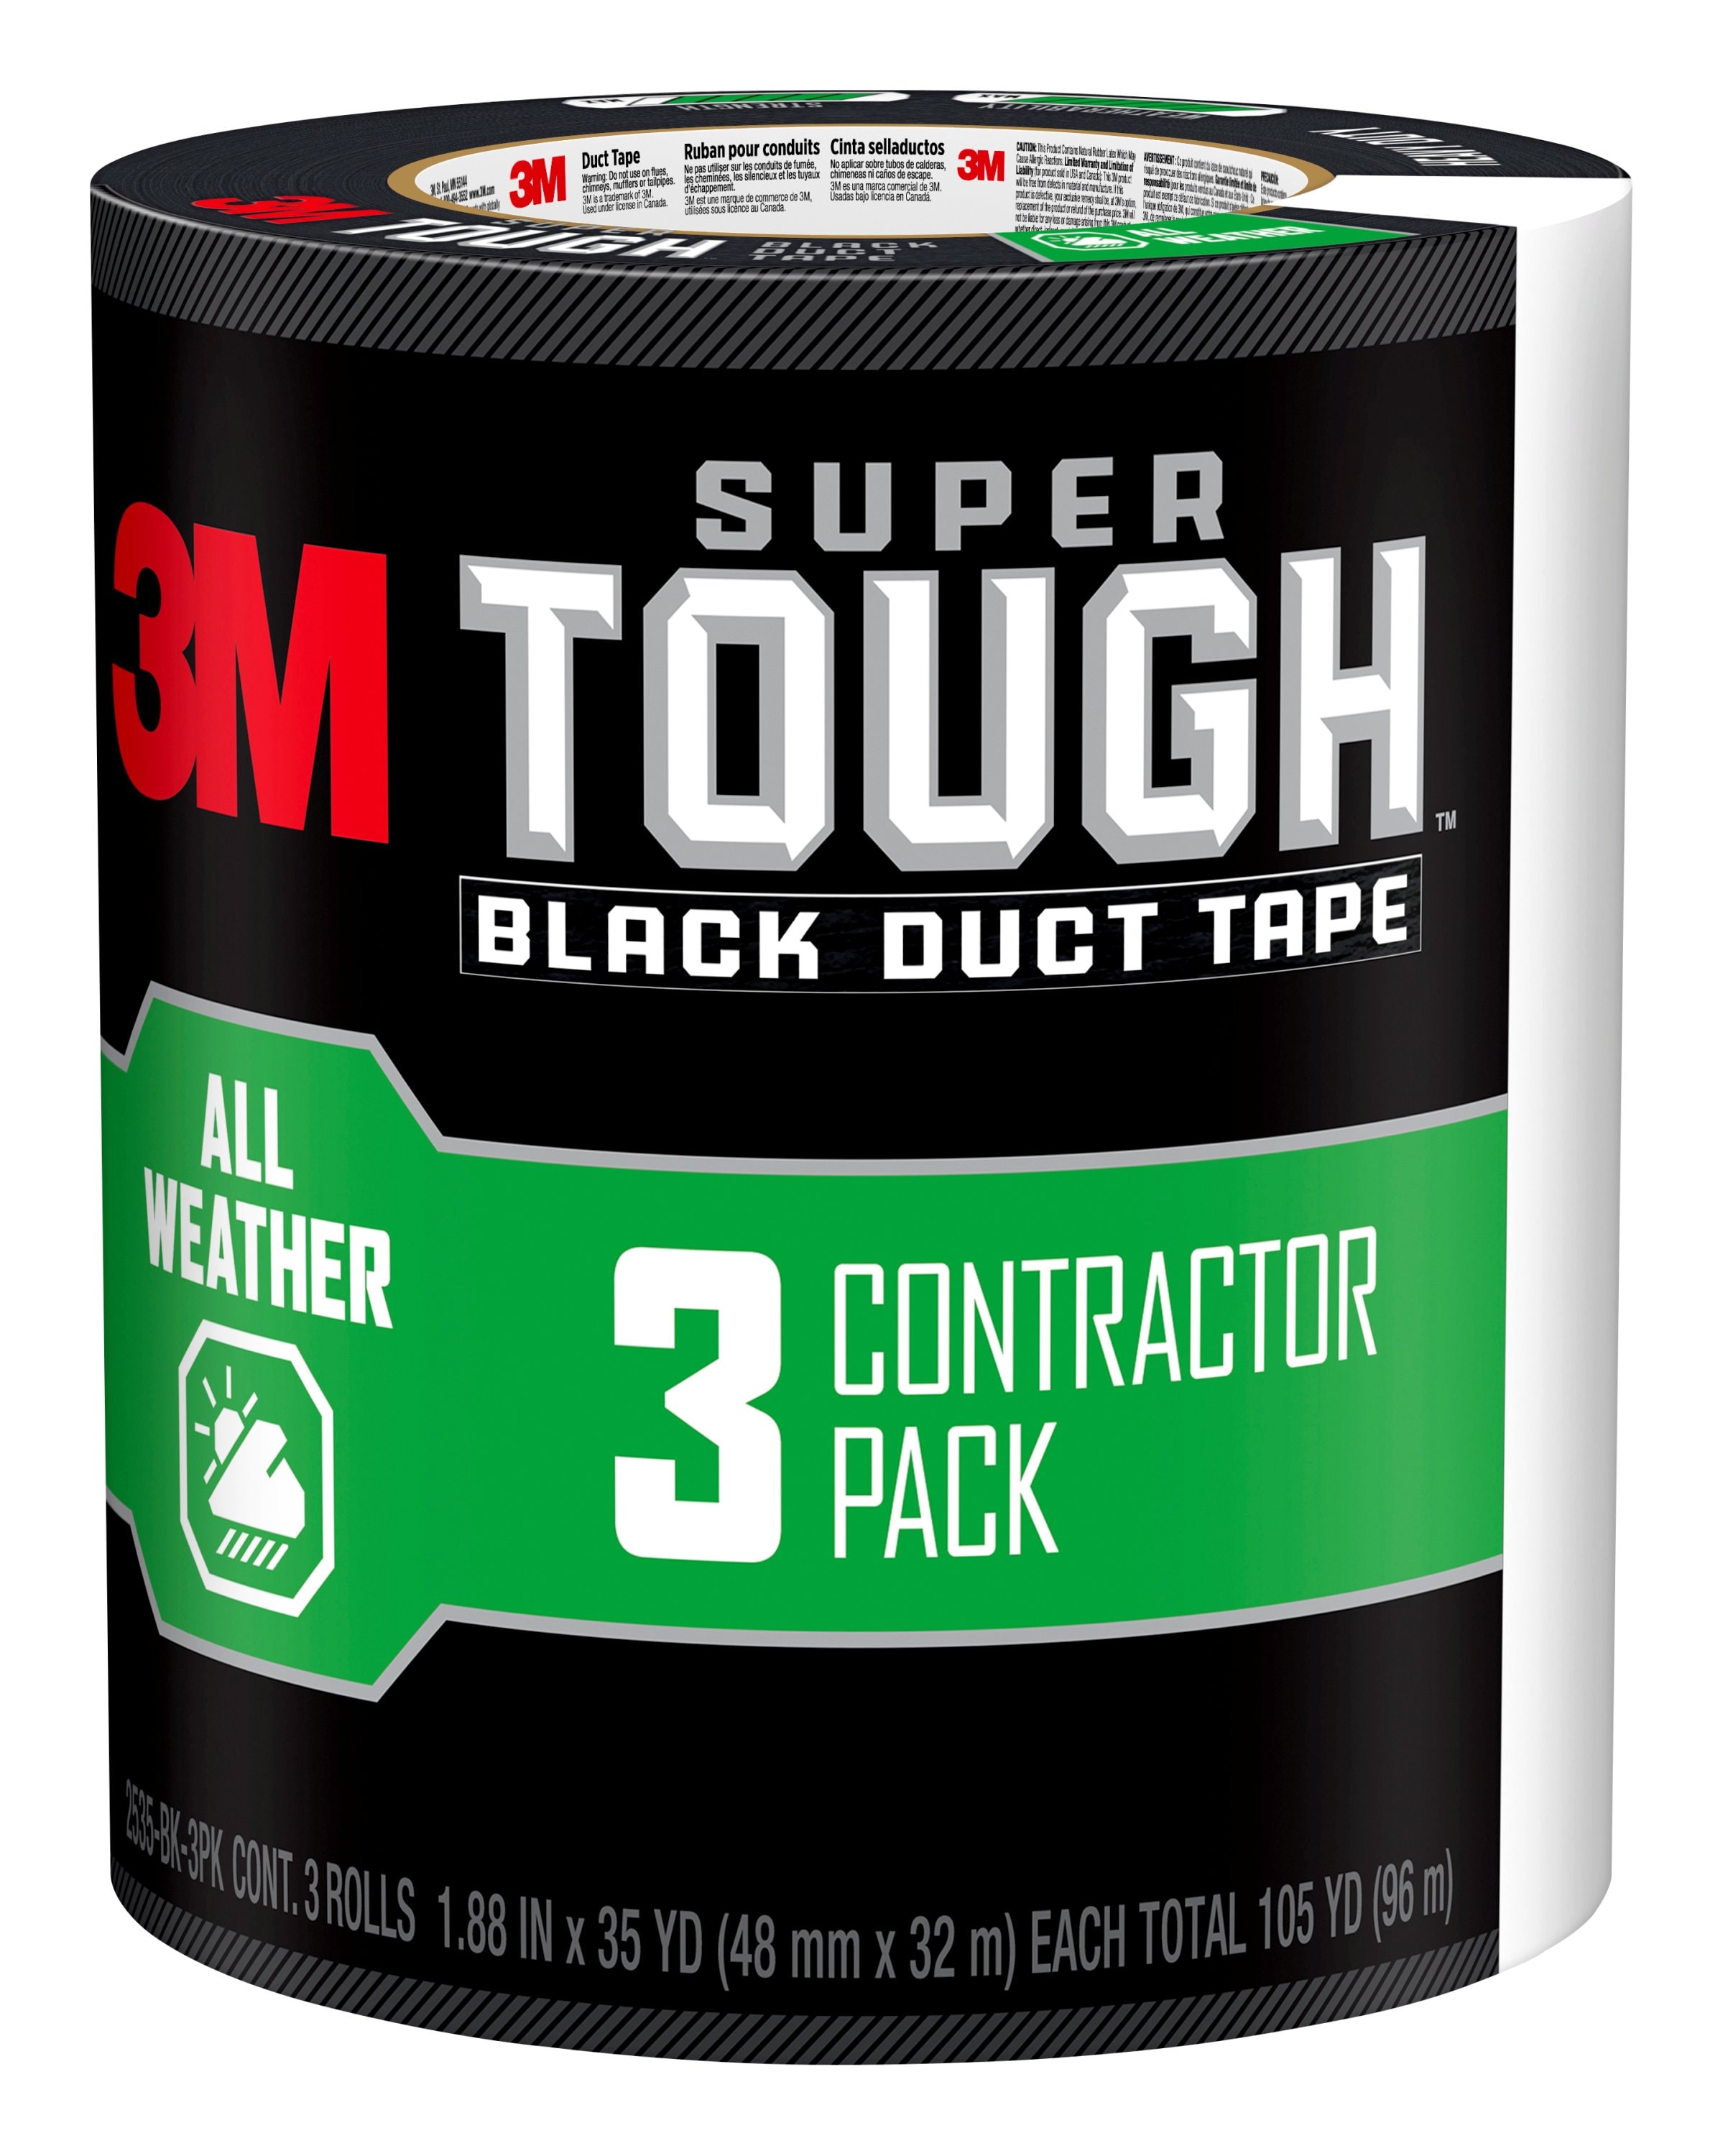 3M Multi-Use Color Duct Tape, Black, 1.88 inches x 20 yards, 1